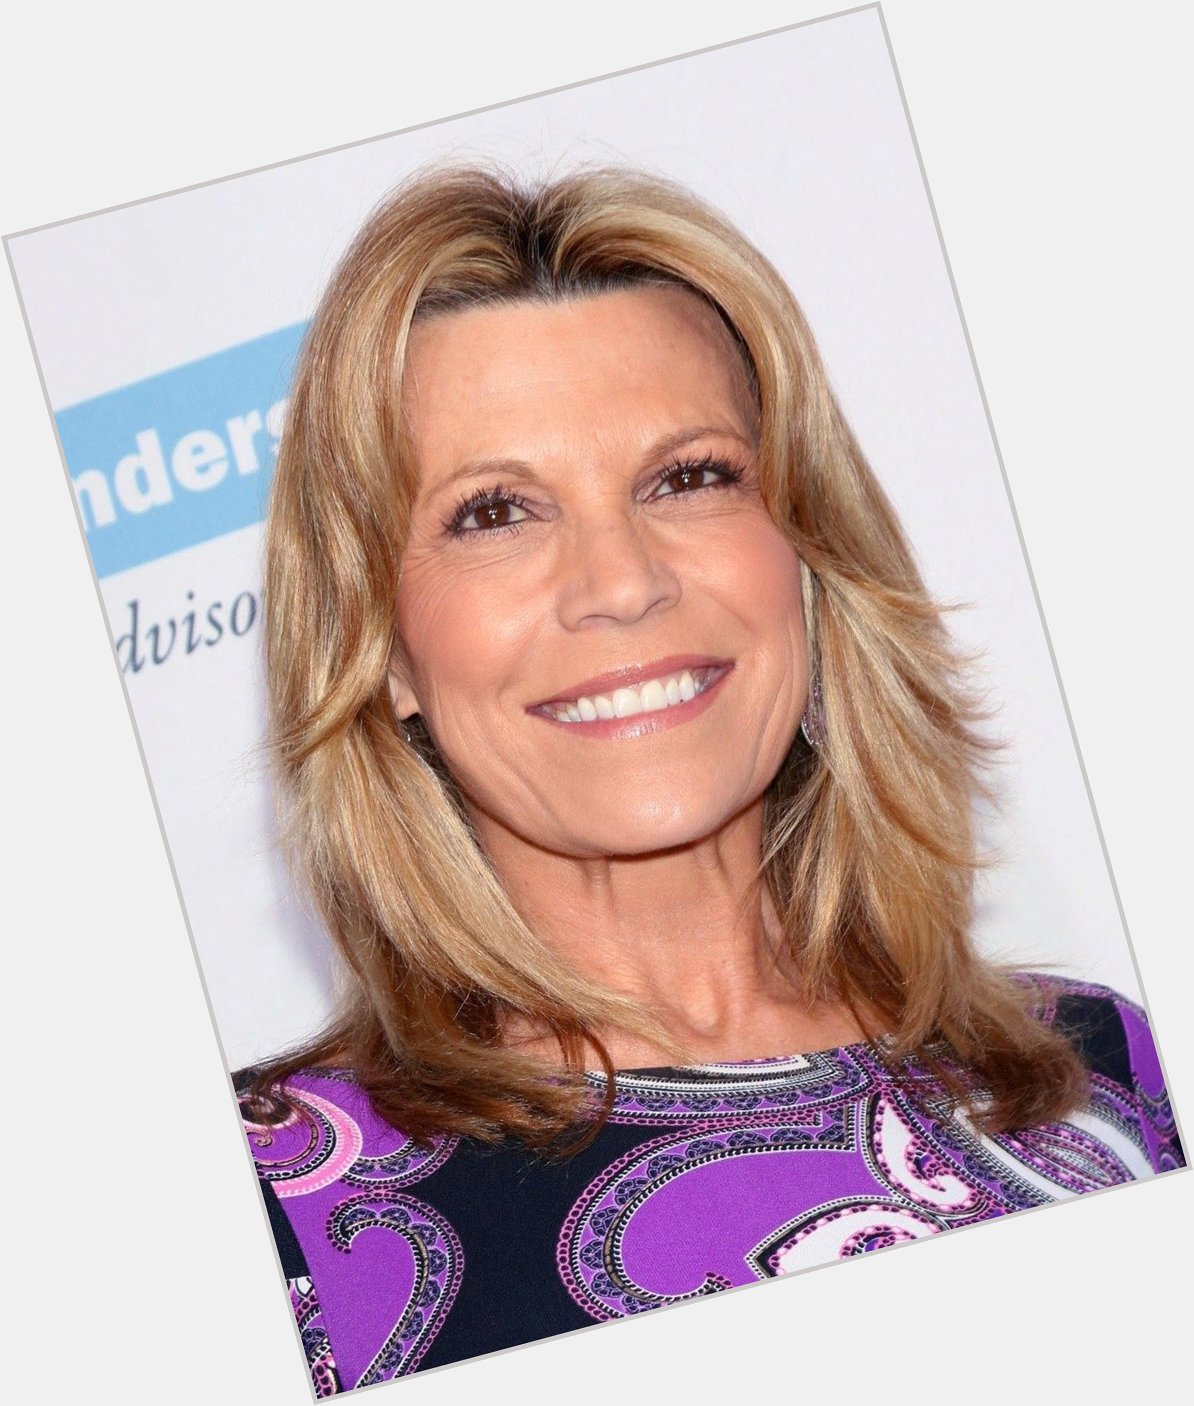 Happy birthday Vanna White you are 65 years old today and your great as the hostess of Wheel of Fortune. 